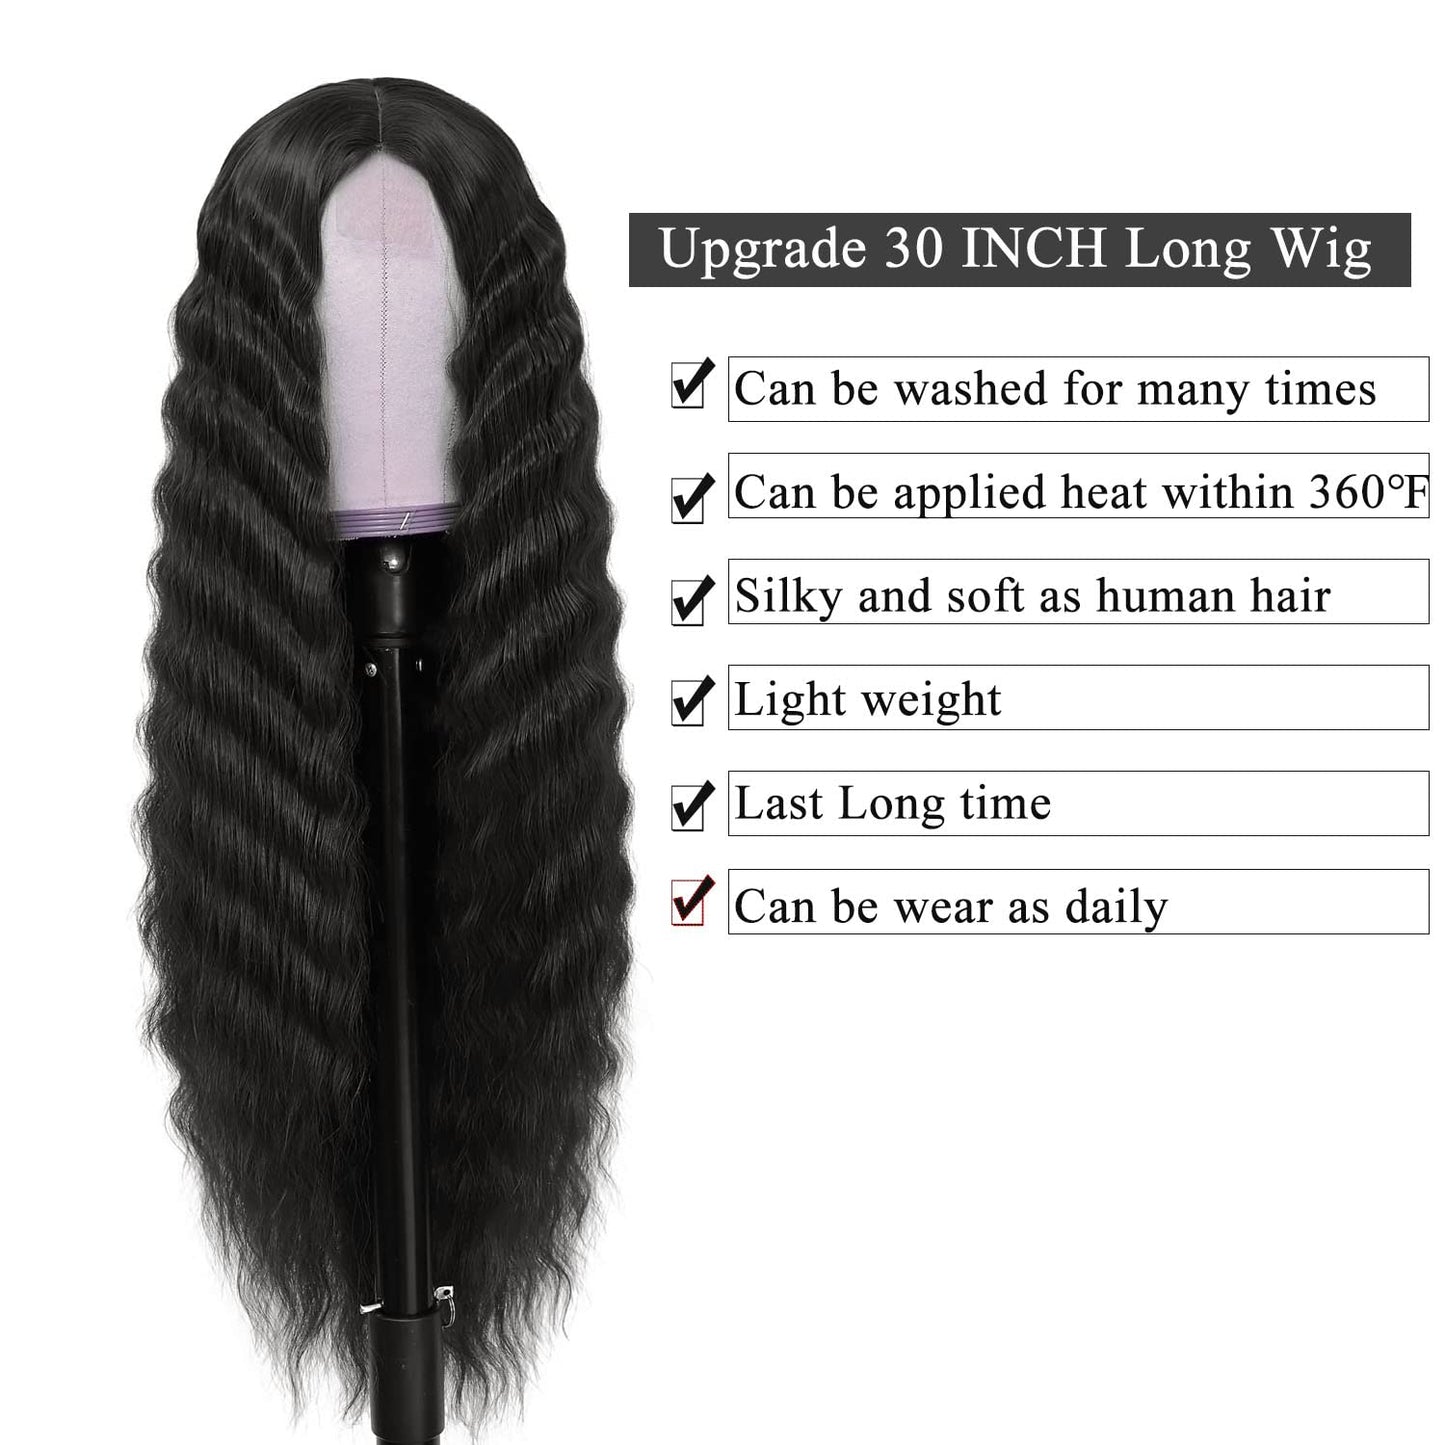 Long Synthetic Curly Lace Front Wig with 9 piece  Lace Front Wig Kit.